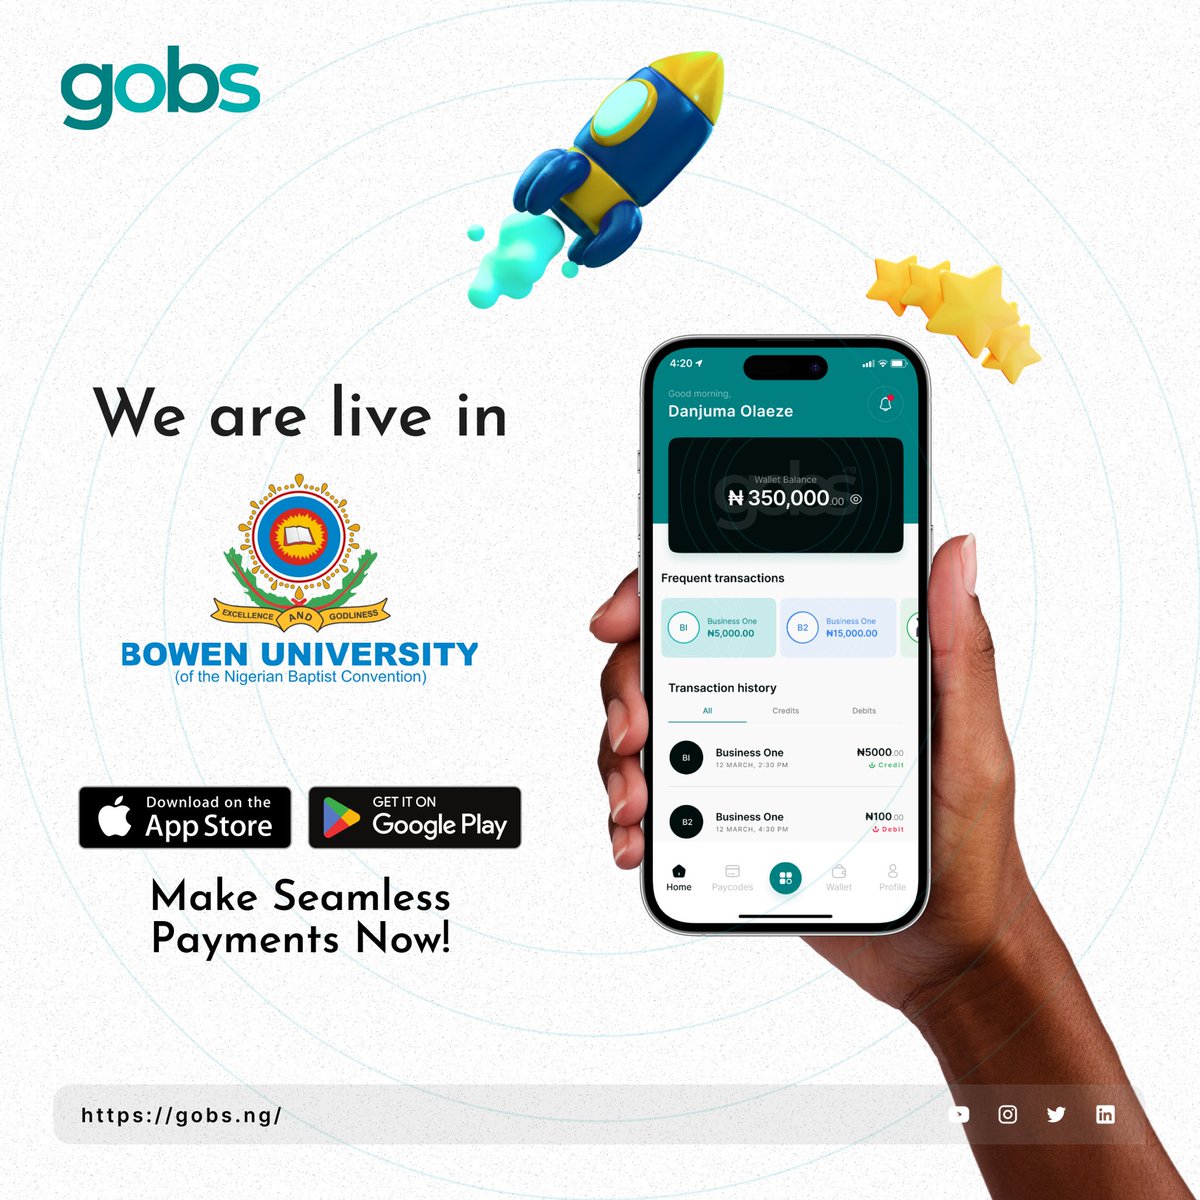 We’re thrilled to announce that we are now live in Bowen University🚀

We are the first QR contactless payment service providers in BUI with settlement capabilities💥
This makes us a go-to payment partner for businesses & Bowenites🥳
#QRPayment #ContactlessPayment #GobsApp